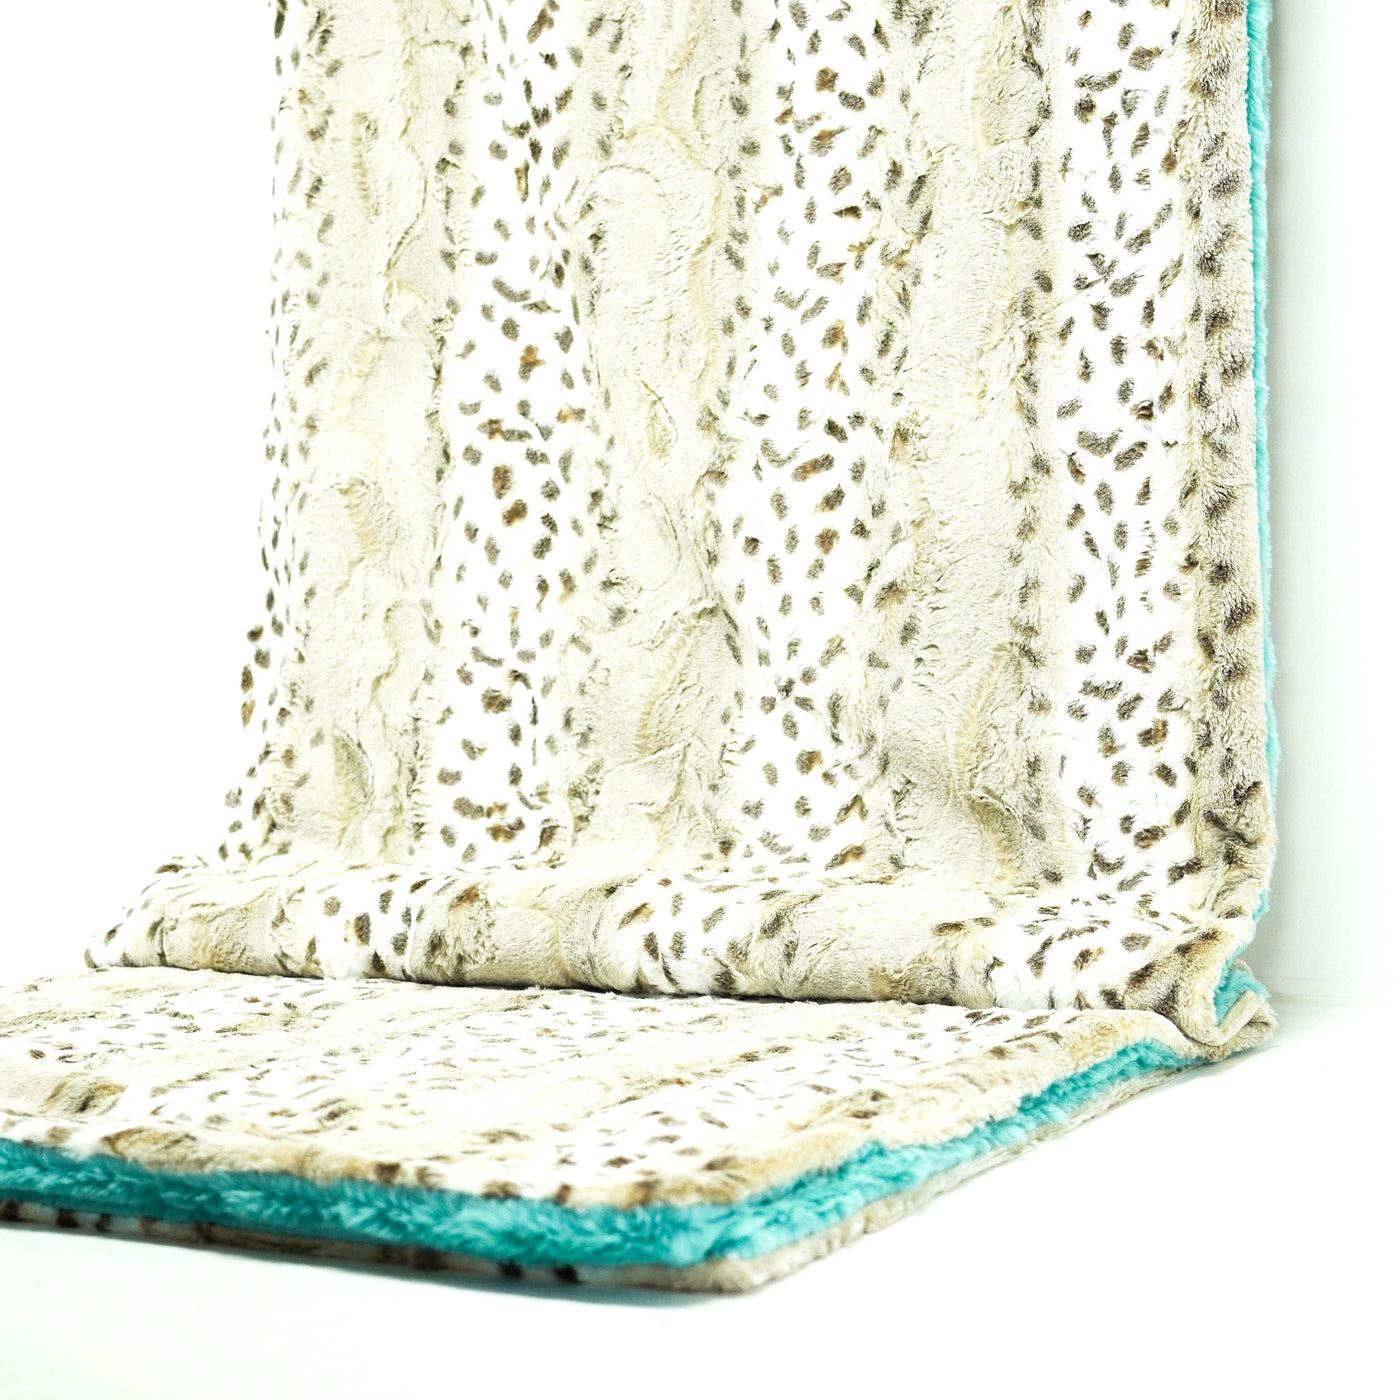 Adult Sized Minky Blanket - Beige Fawn w/ Aqua Bunny-Adult Sized Minky Blanket-Western-Cowhide-Bags-Handmade-Products-Gifts-Dancing Cactus Designs